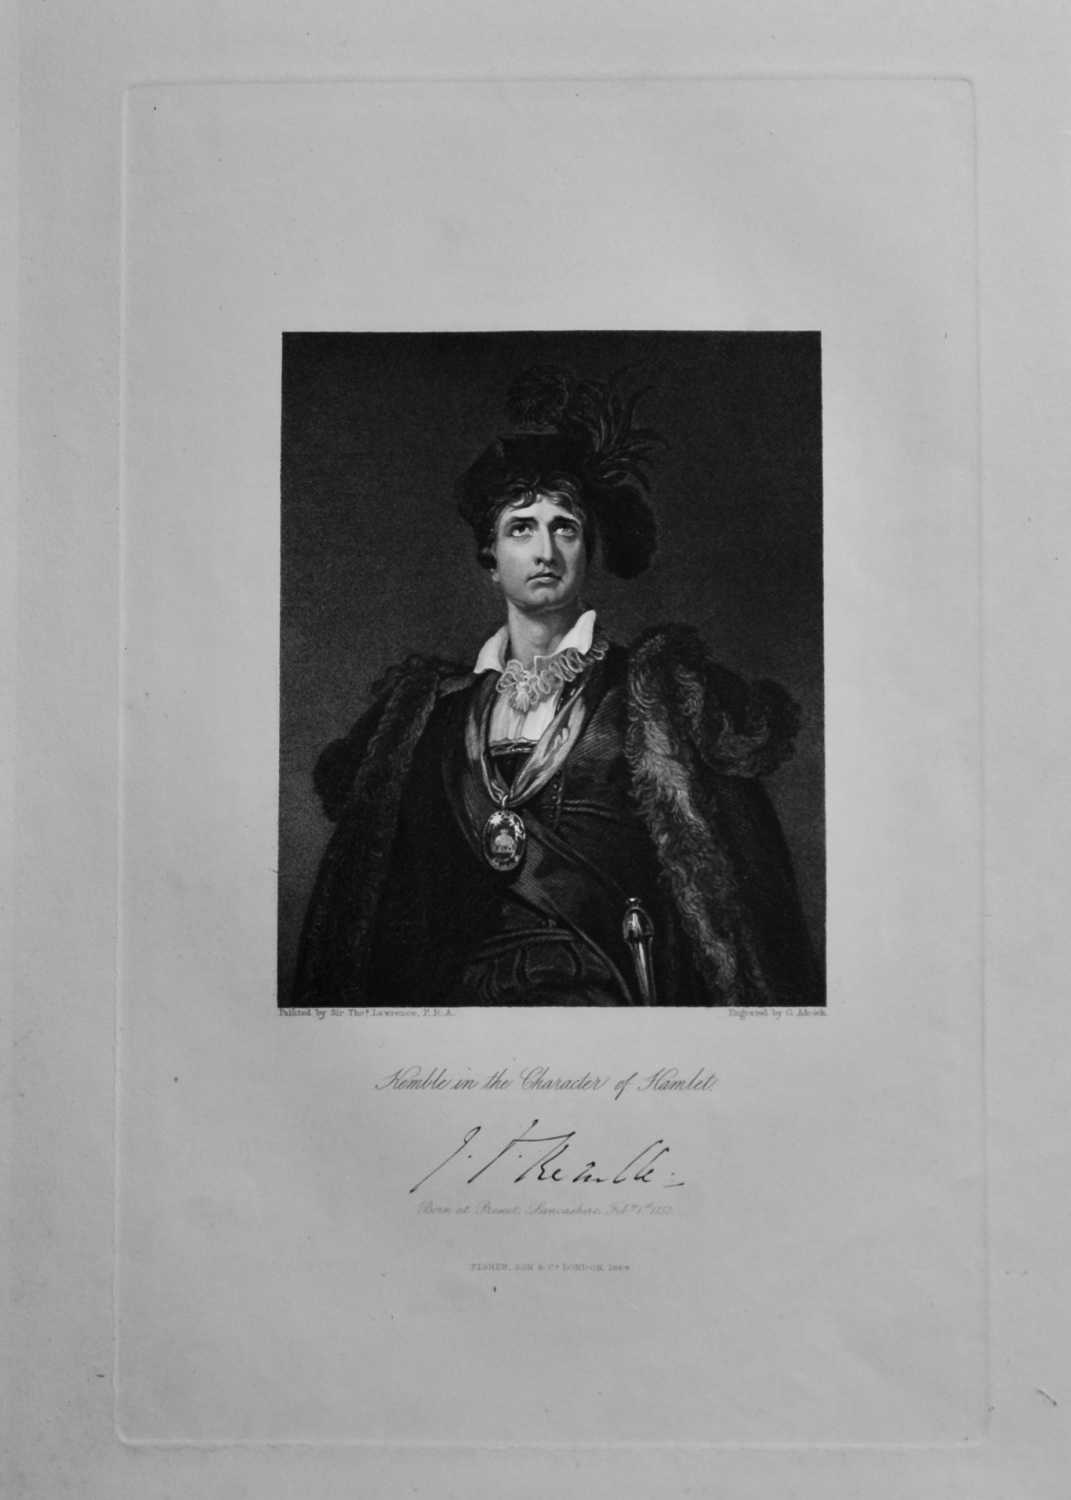 Kemble in the Character of Hamlet.  1850c.